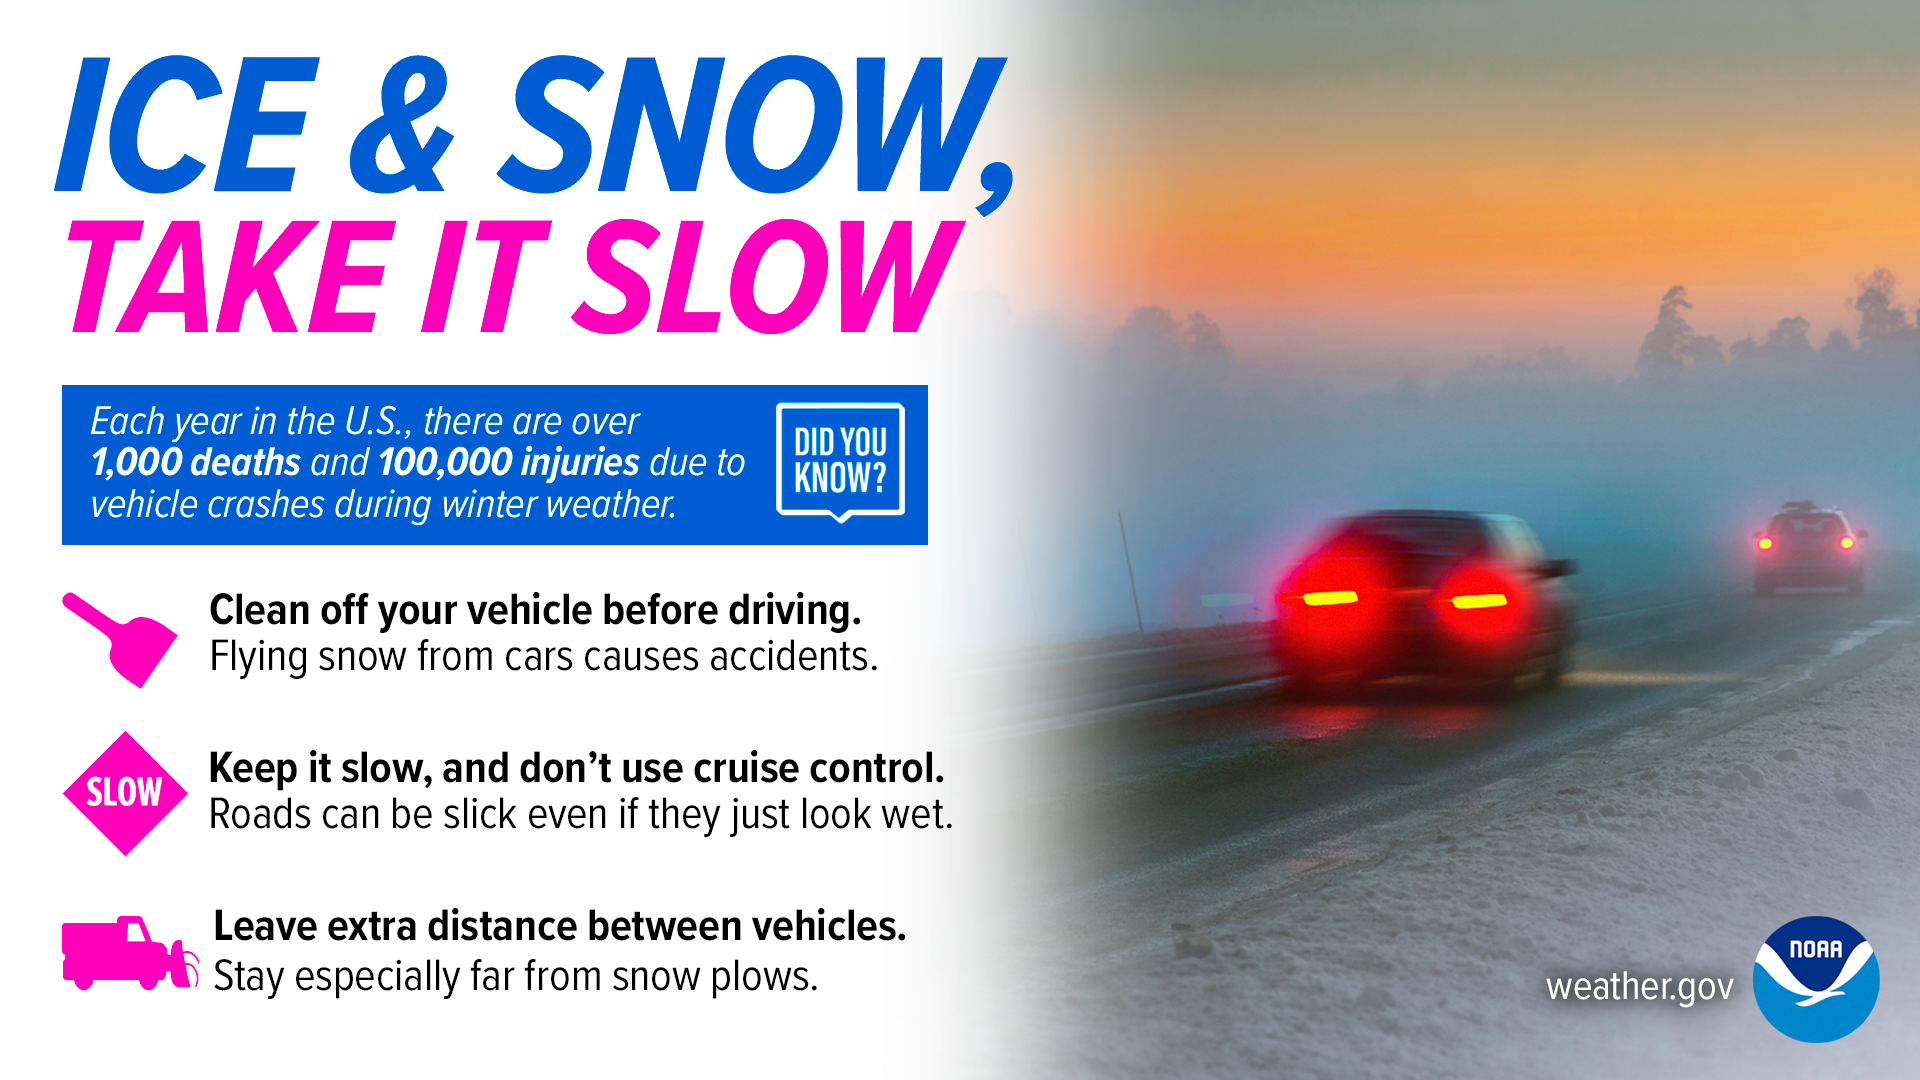 Did you know? Each year in the United States, there are over 1,000 deaths and 100,000 injuries due to vehicle crashes during winter weather. Clean off your vehicle before driving. Flying snow from cars causes accidents. Keep it slow, and don’t use cruise control. Roads can be slick even if they just look wet. Leave extra distance between vehicles. Stay especially far from snow plows.